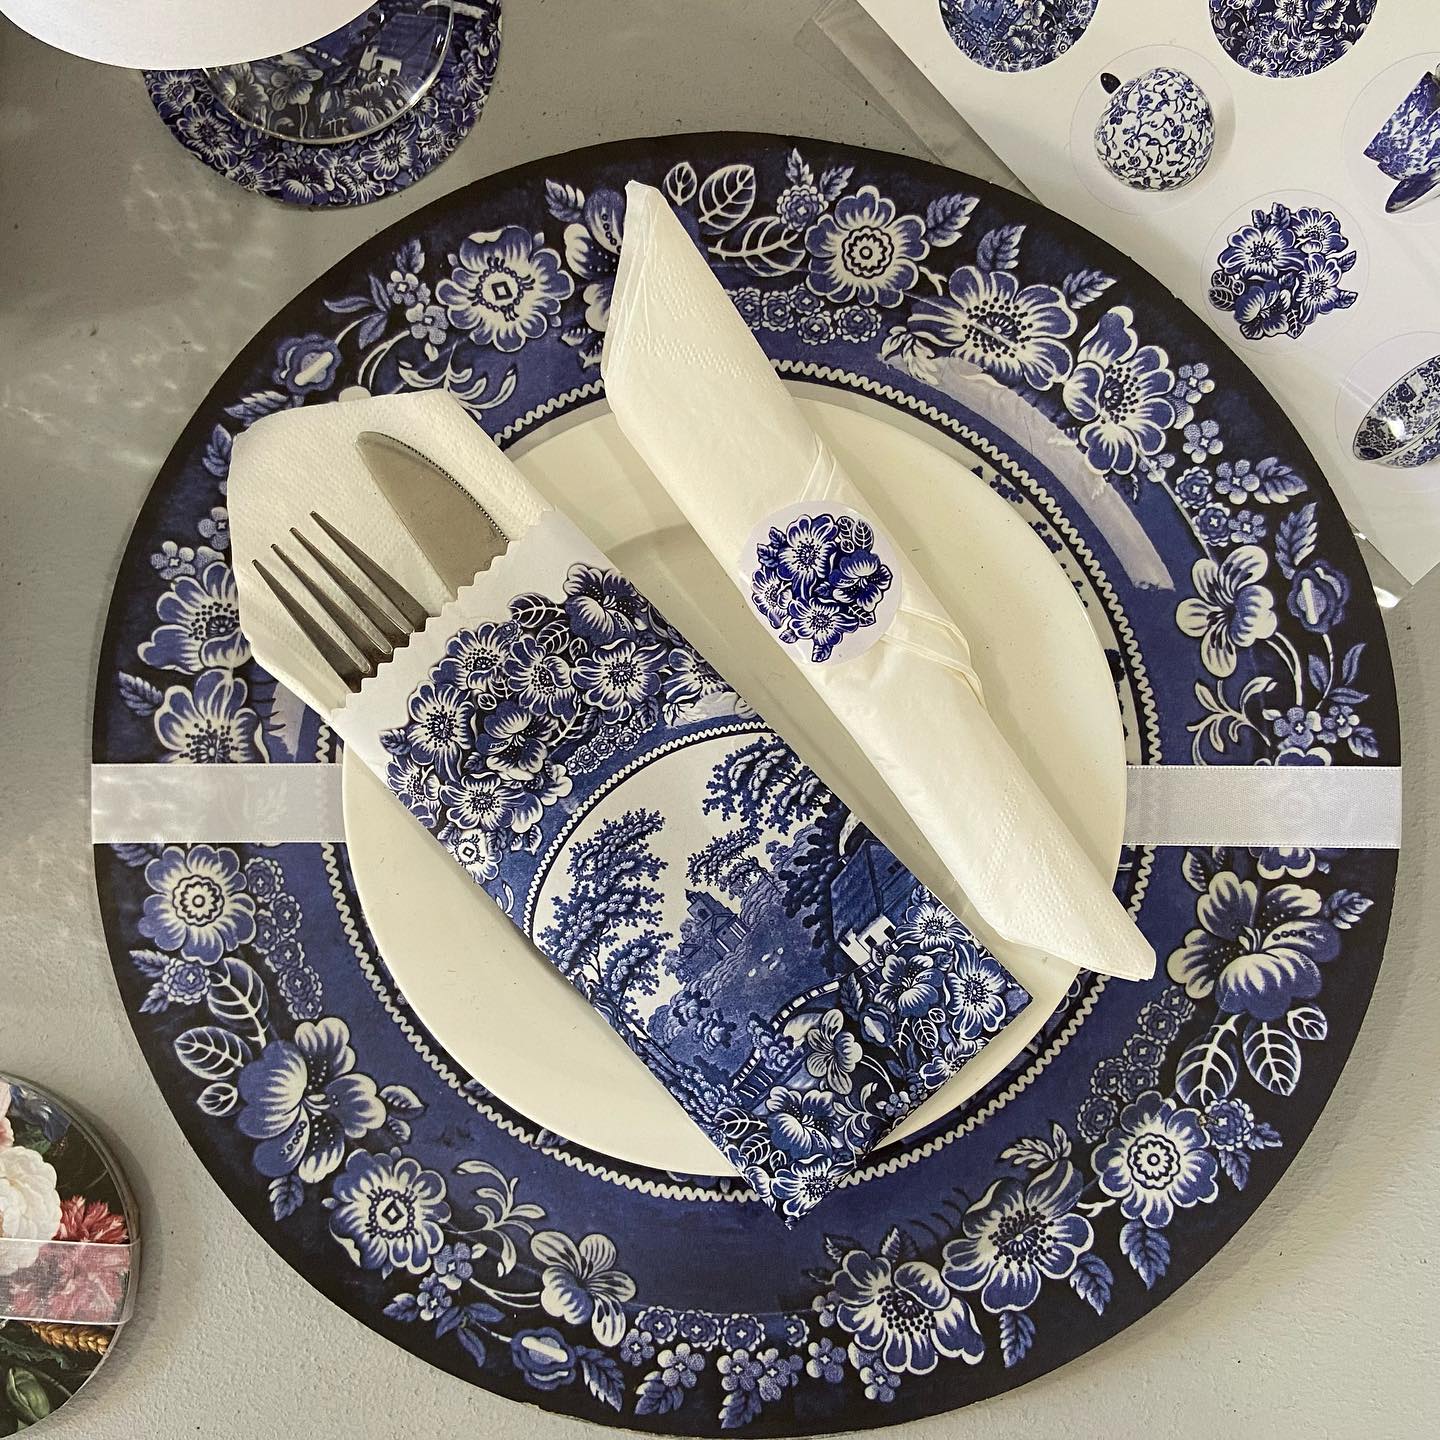 Delft Paper Underplates (24 Sheets)